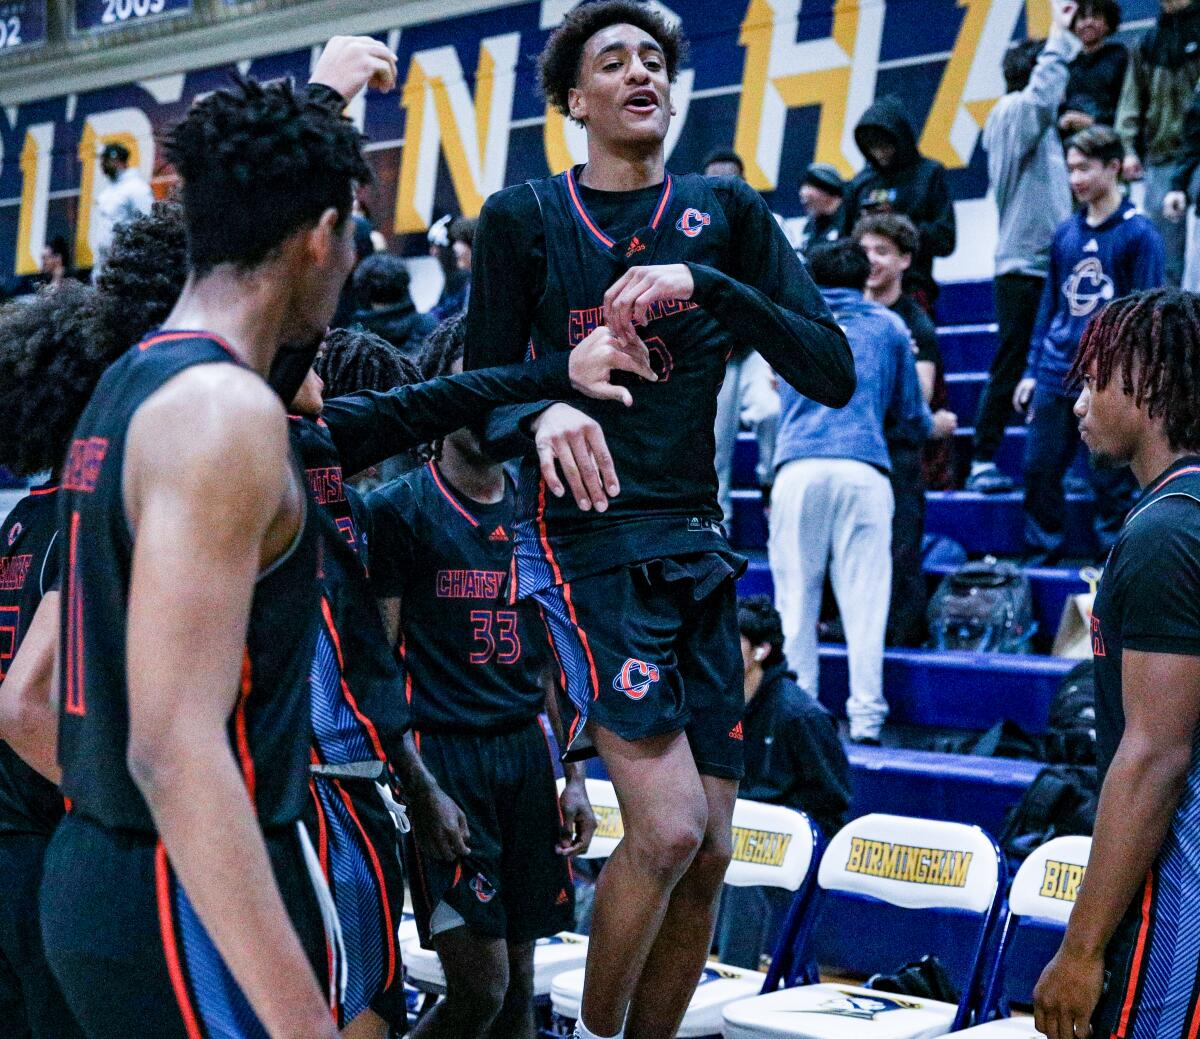 Alijah Arenas of Chatsworth celebrates after making a three-point shot.